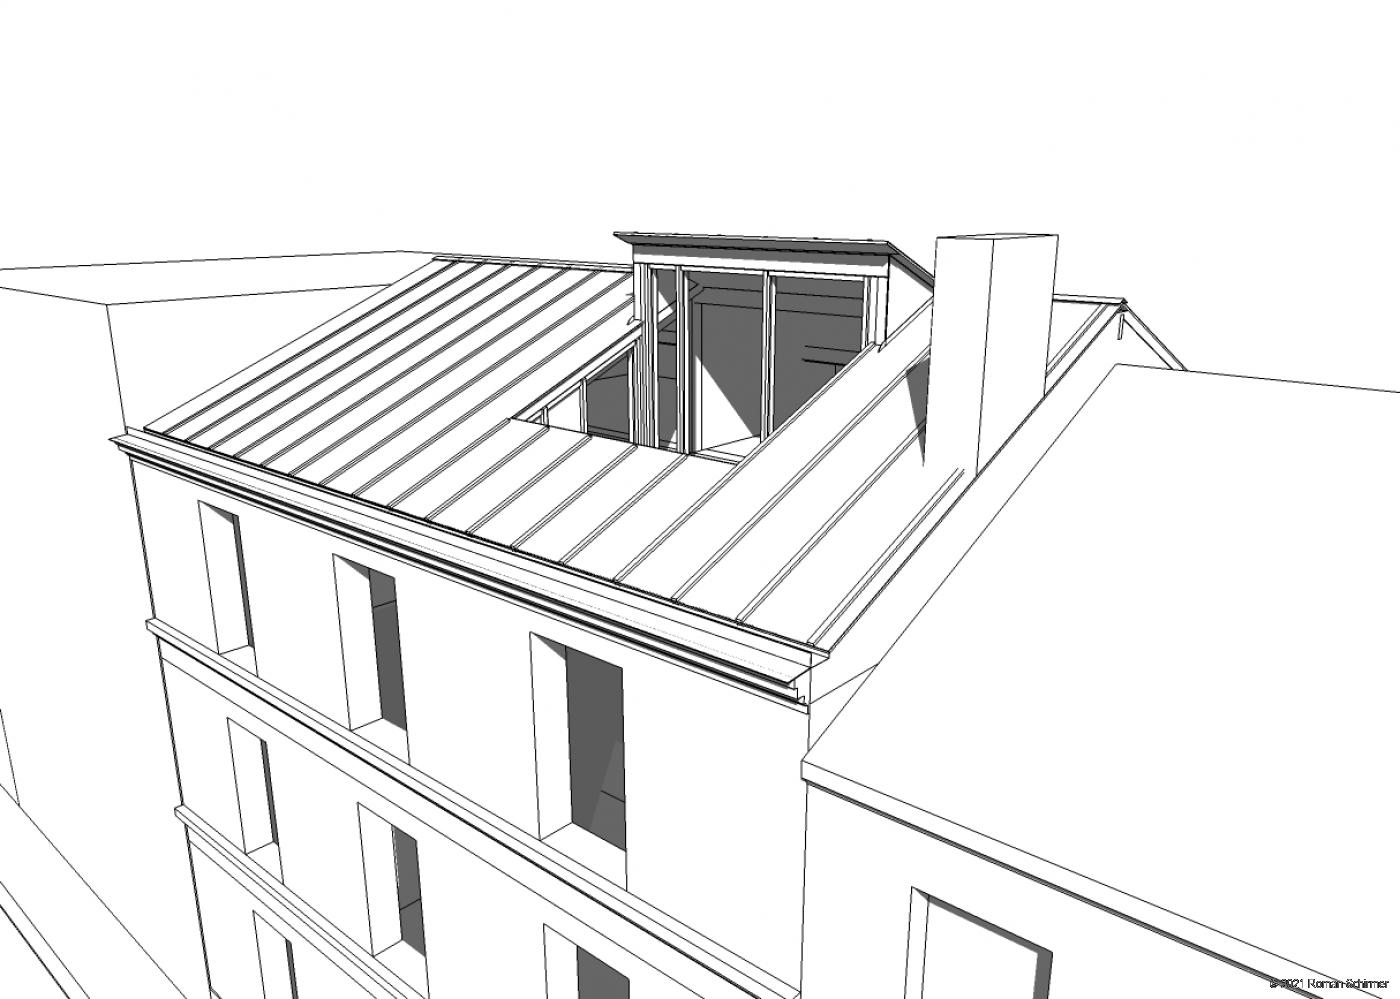 Loft conversion and creation of a roof deck 